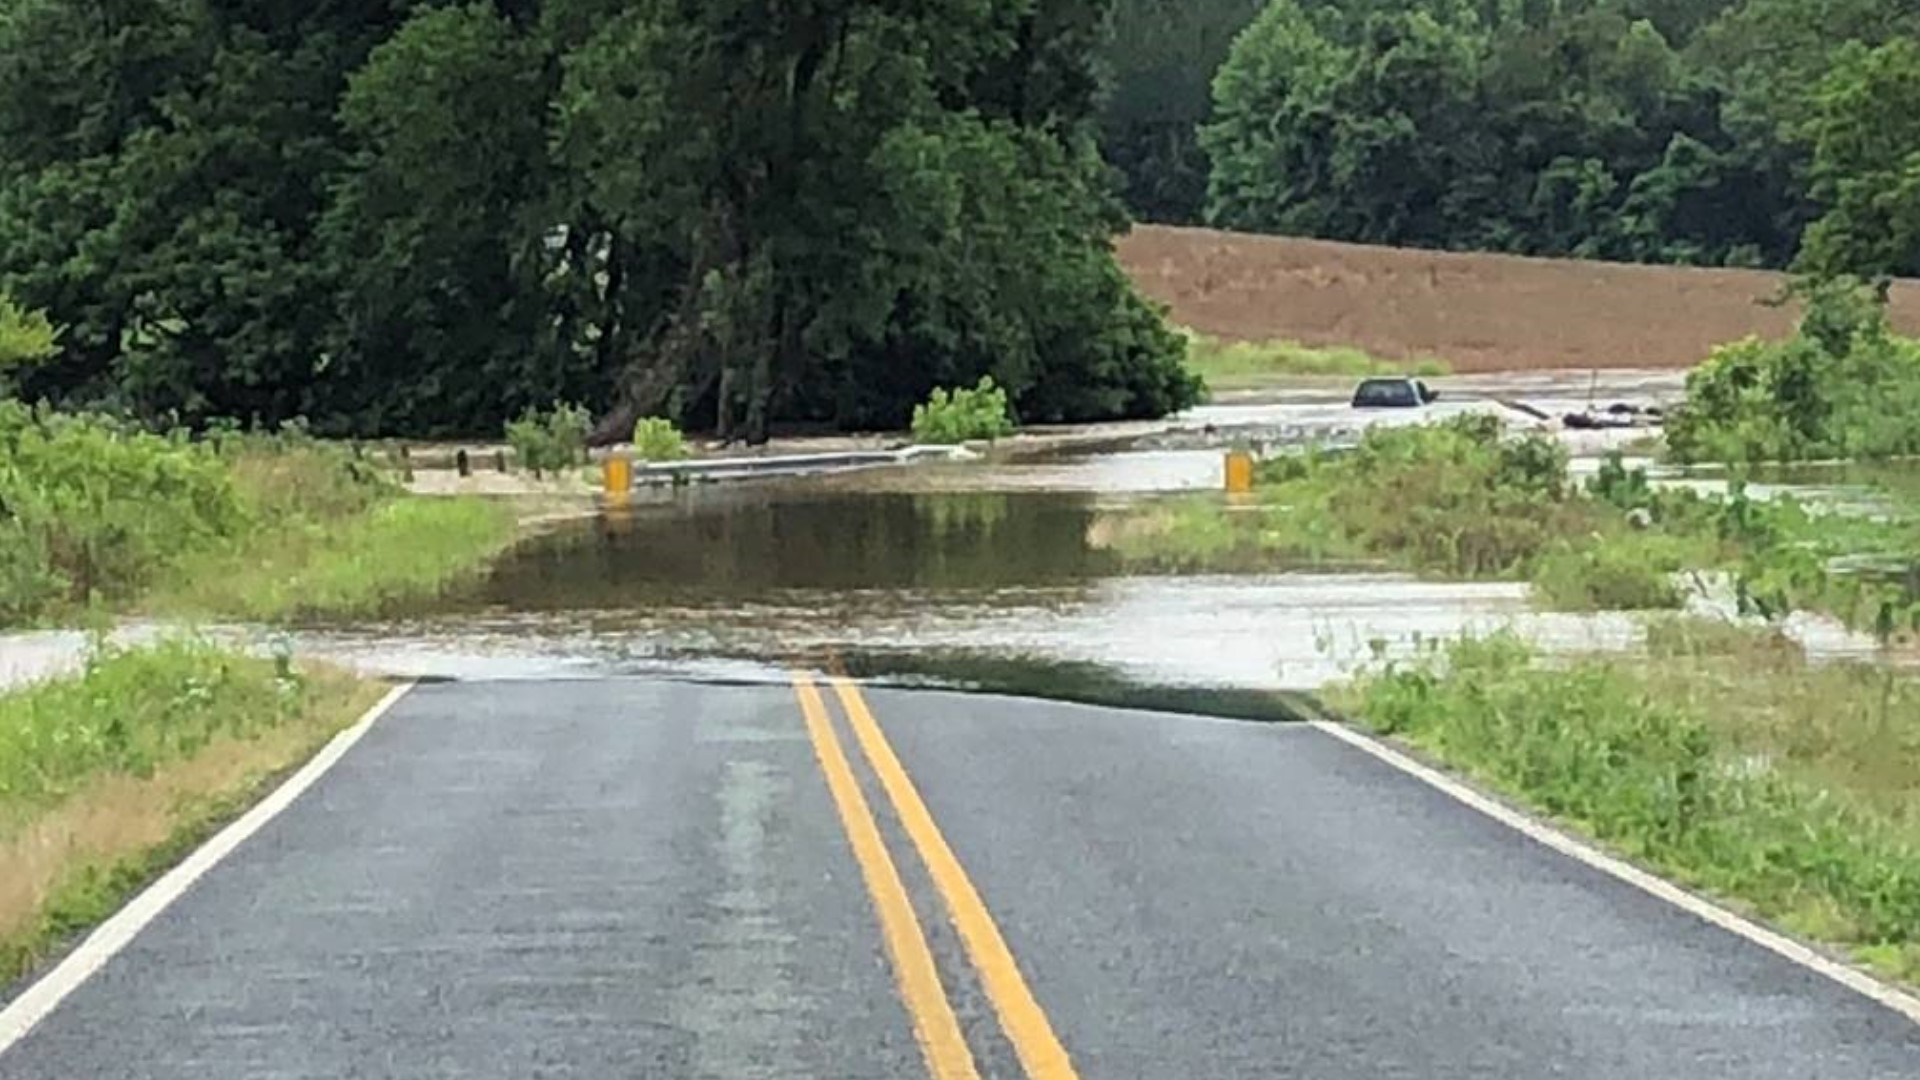 A woman is sharing her story after her car was swept away in dangerous floodwaters. She's safe and recovering, but is also warning people to turn around as soon as they see water on the road.